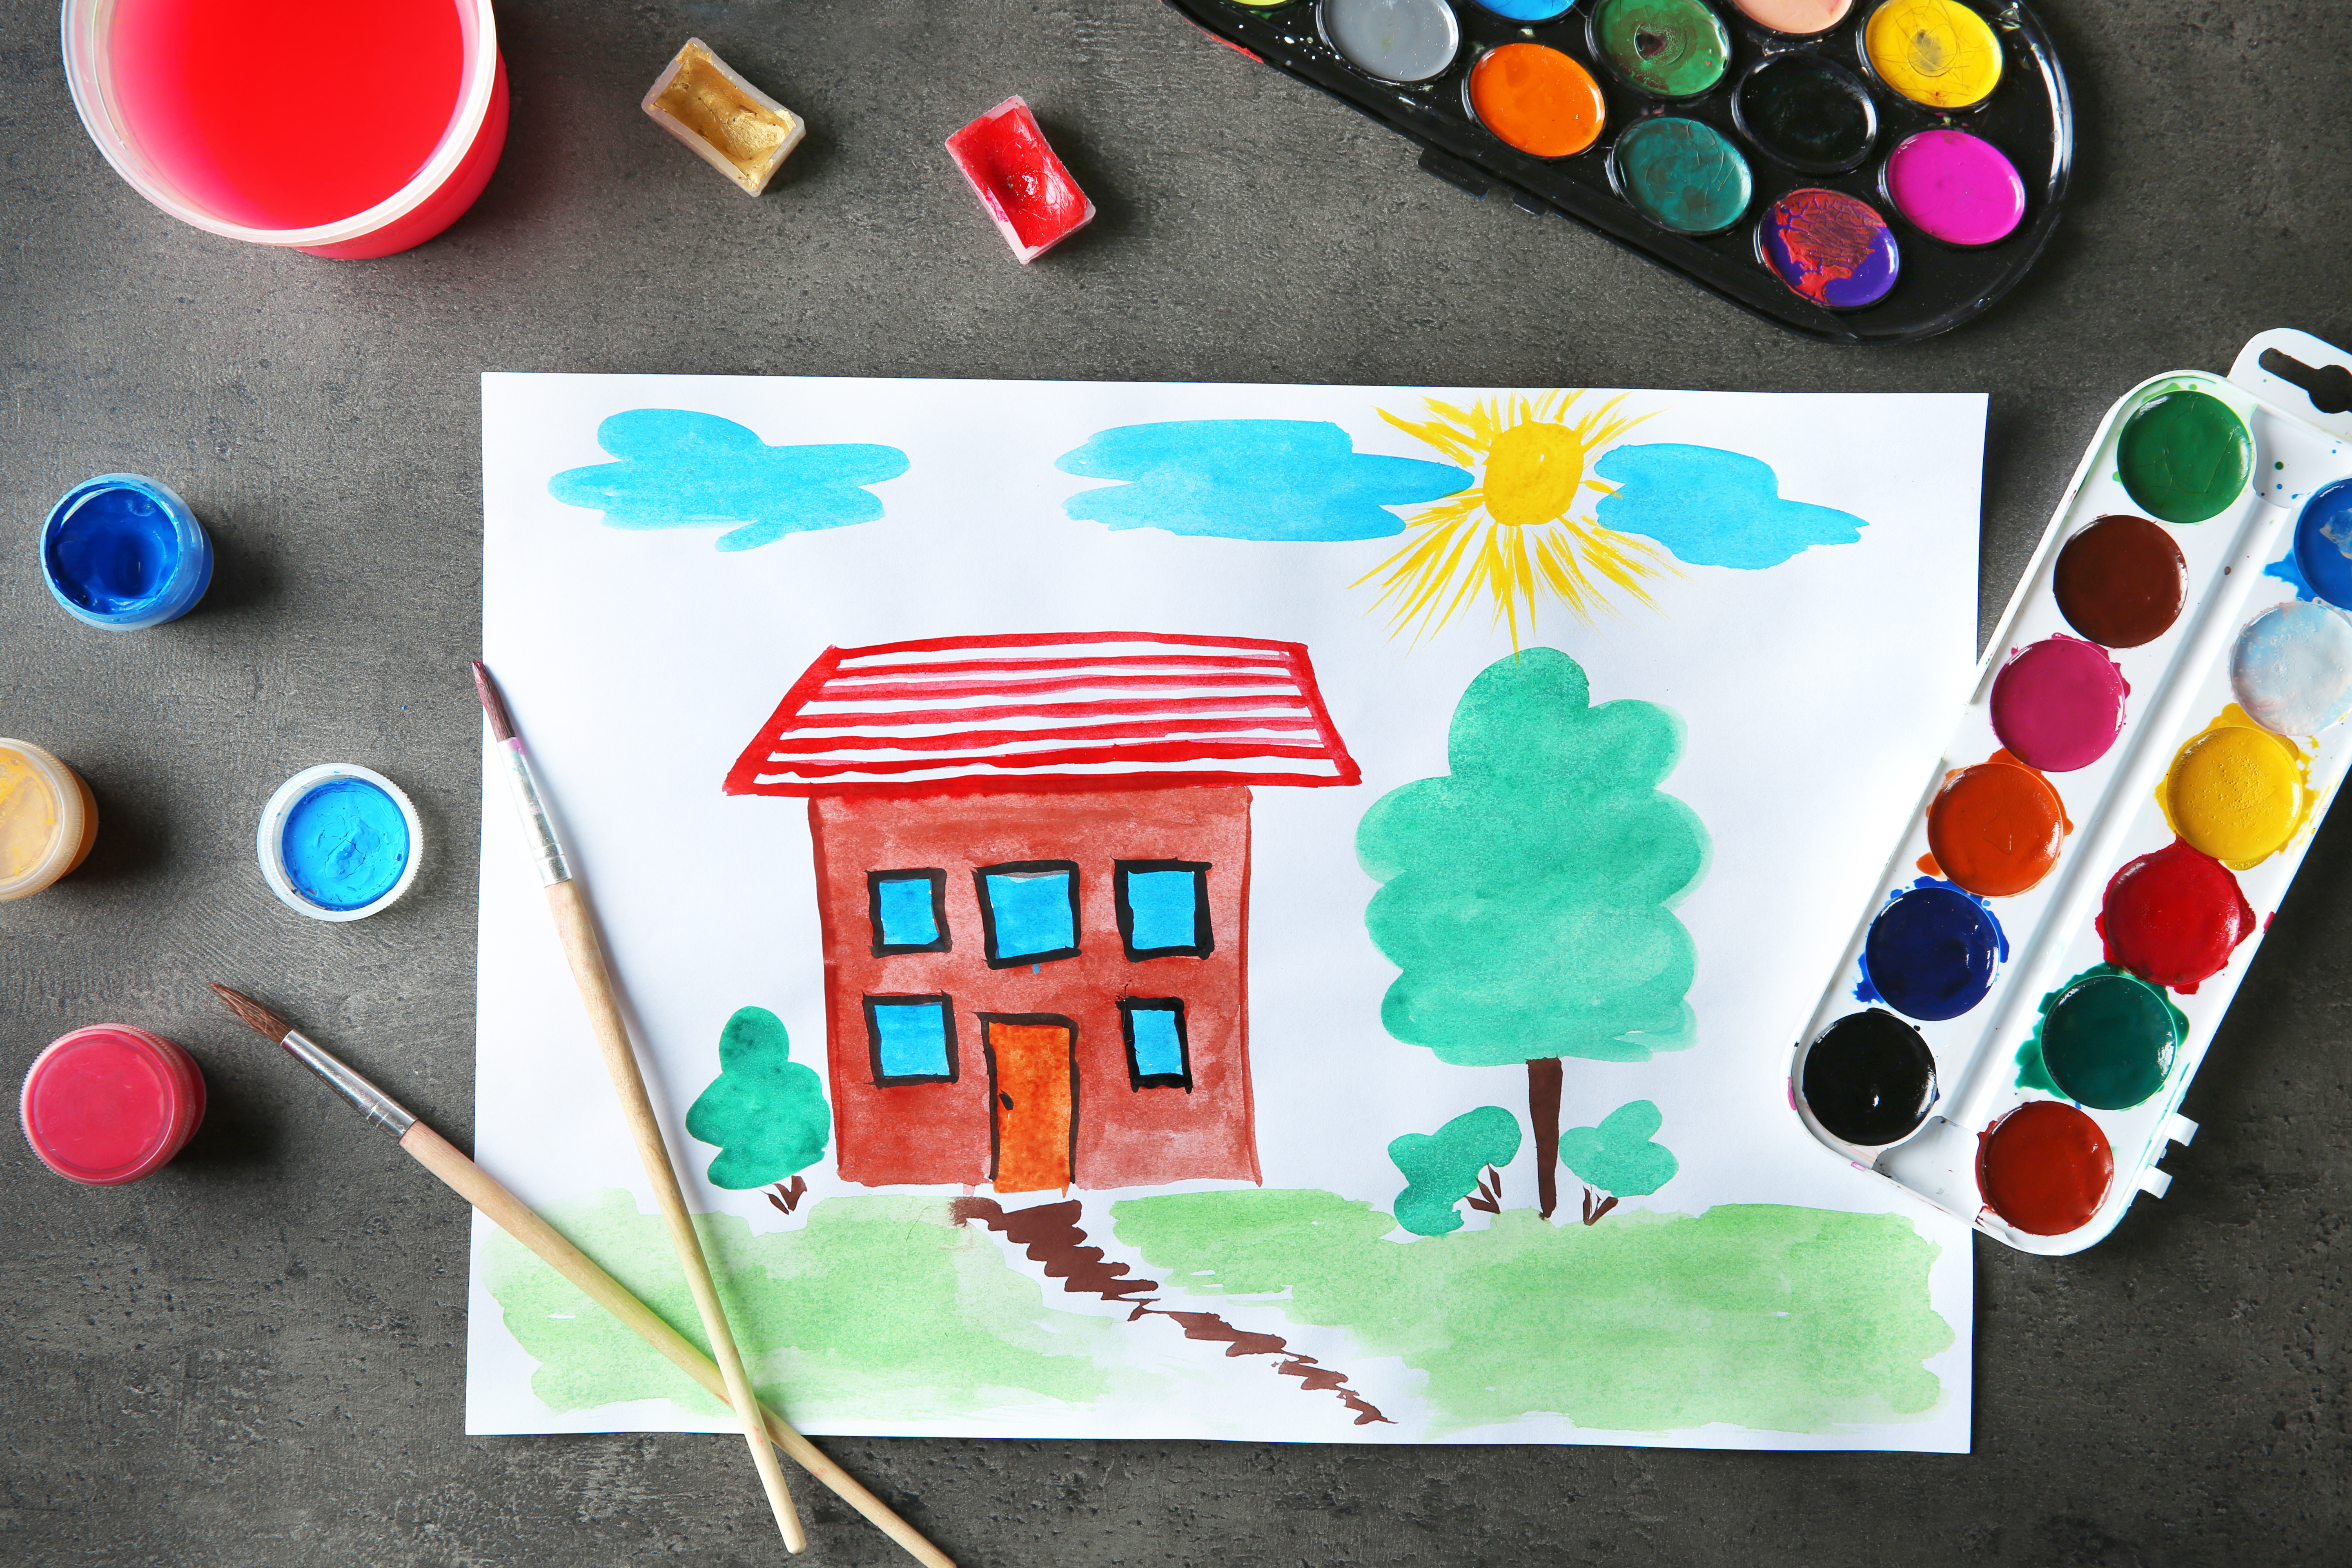 Child's painting of house | Source: Shutterstock